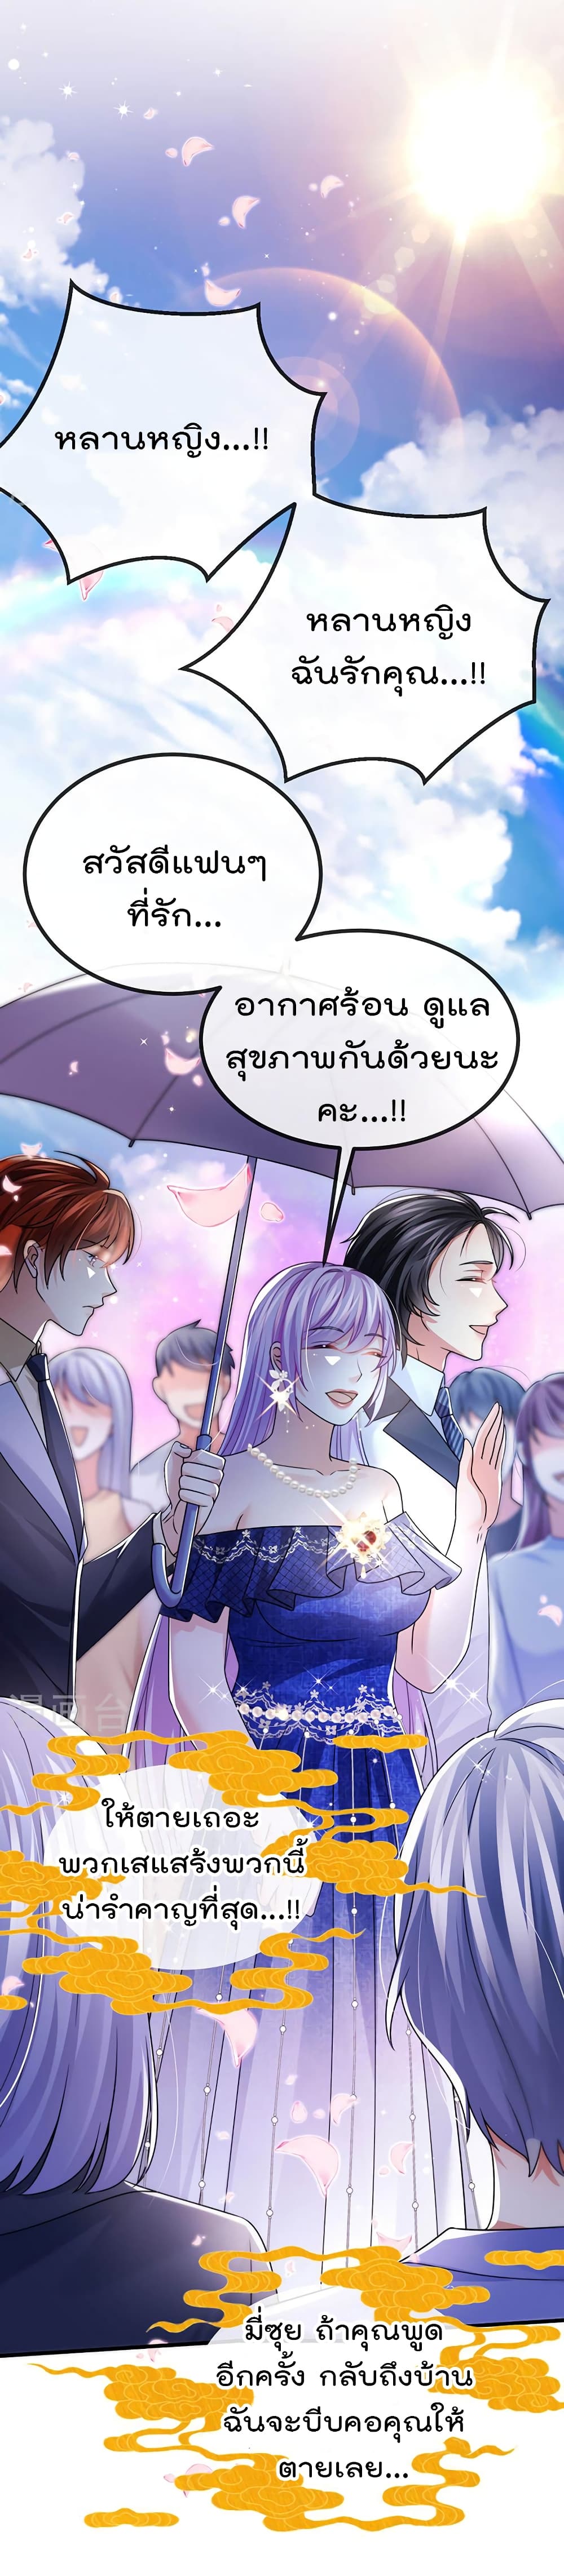 One Hundred Ways to Abuse Scum ตอนที่ 80 (6)